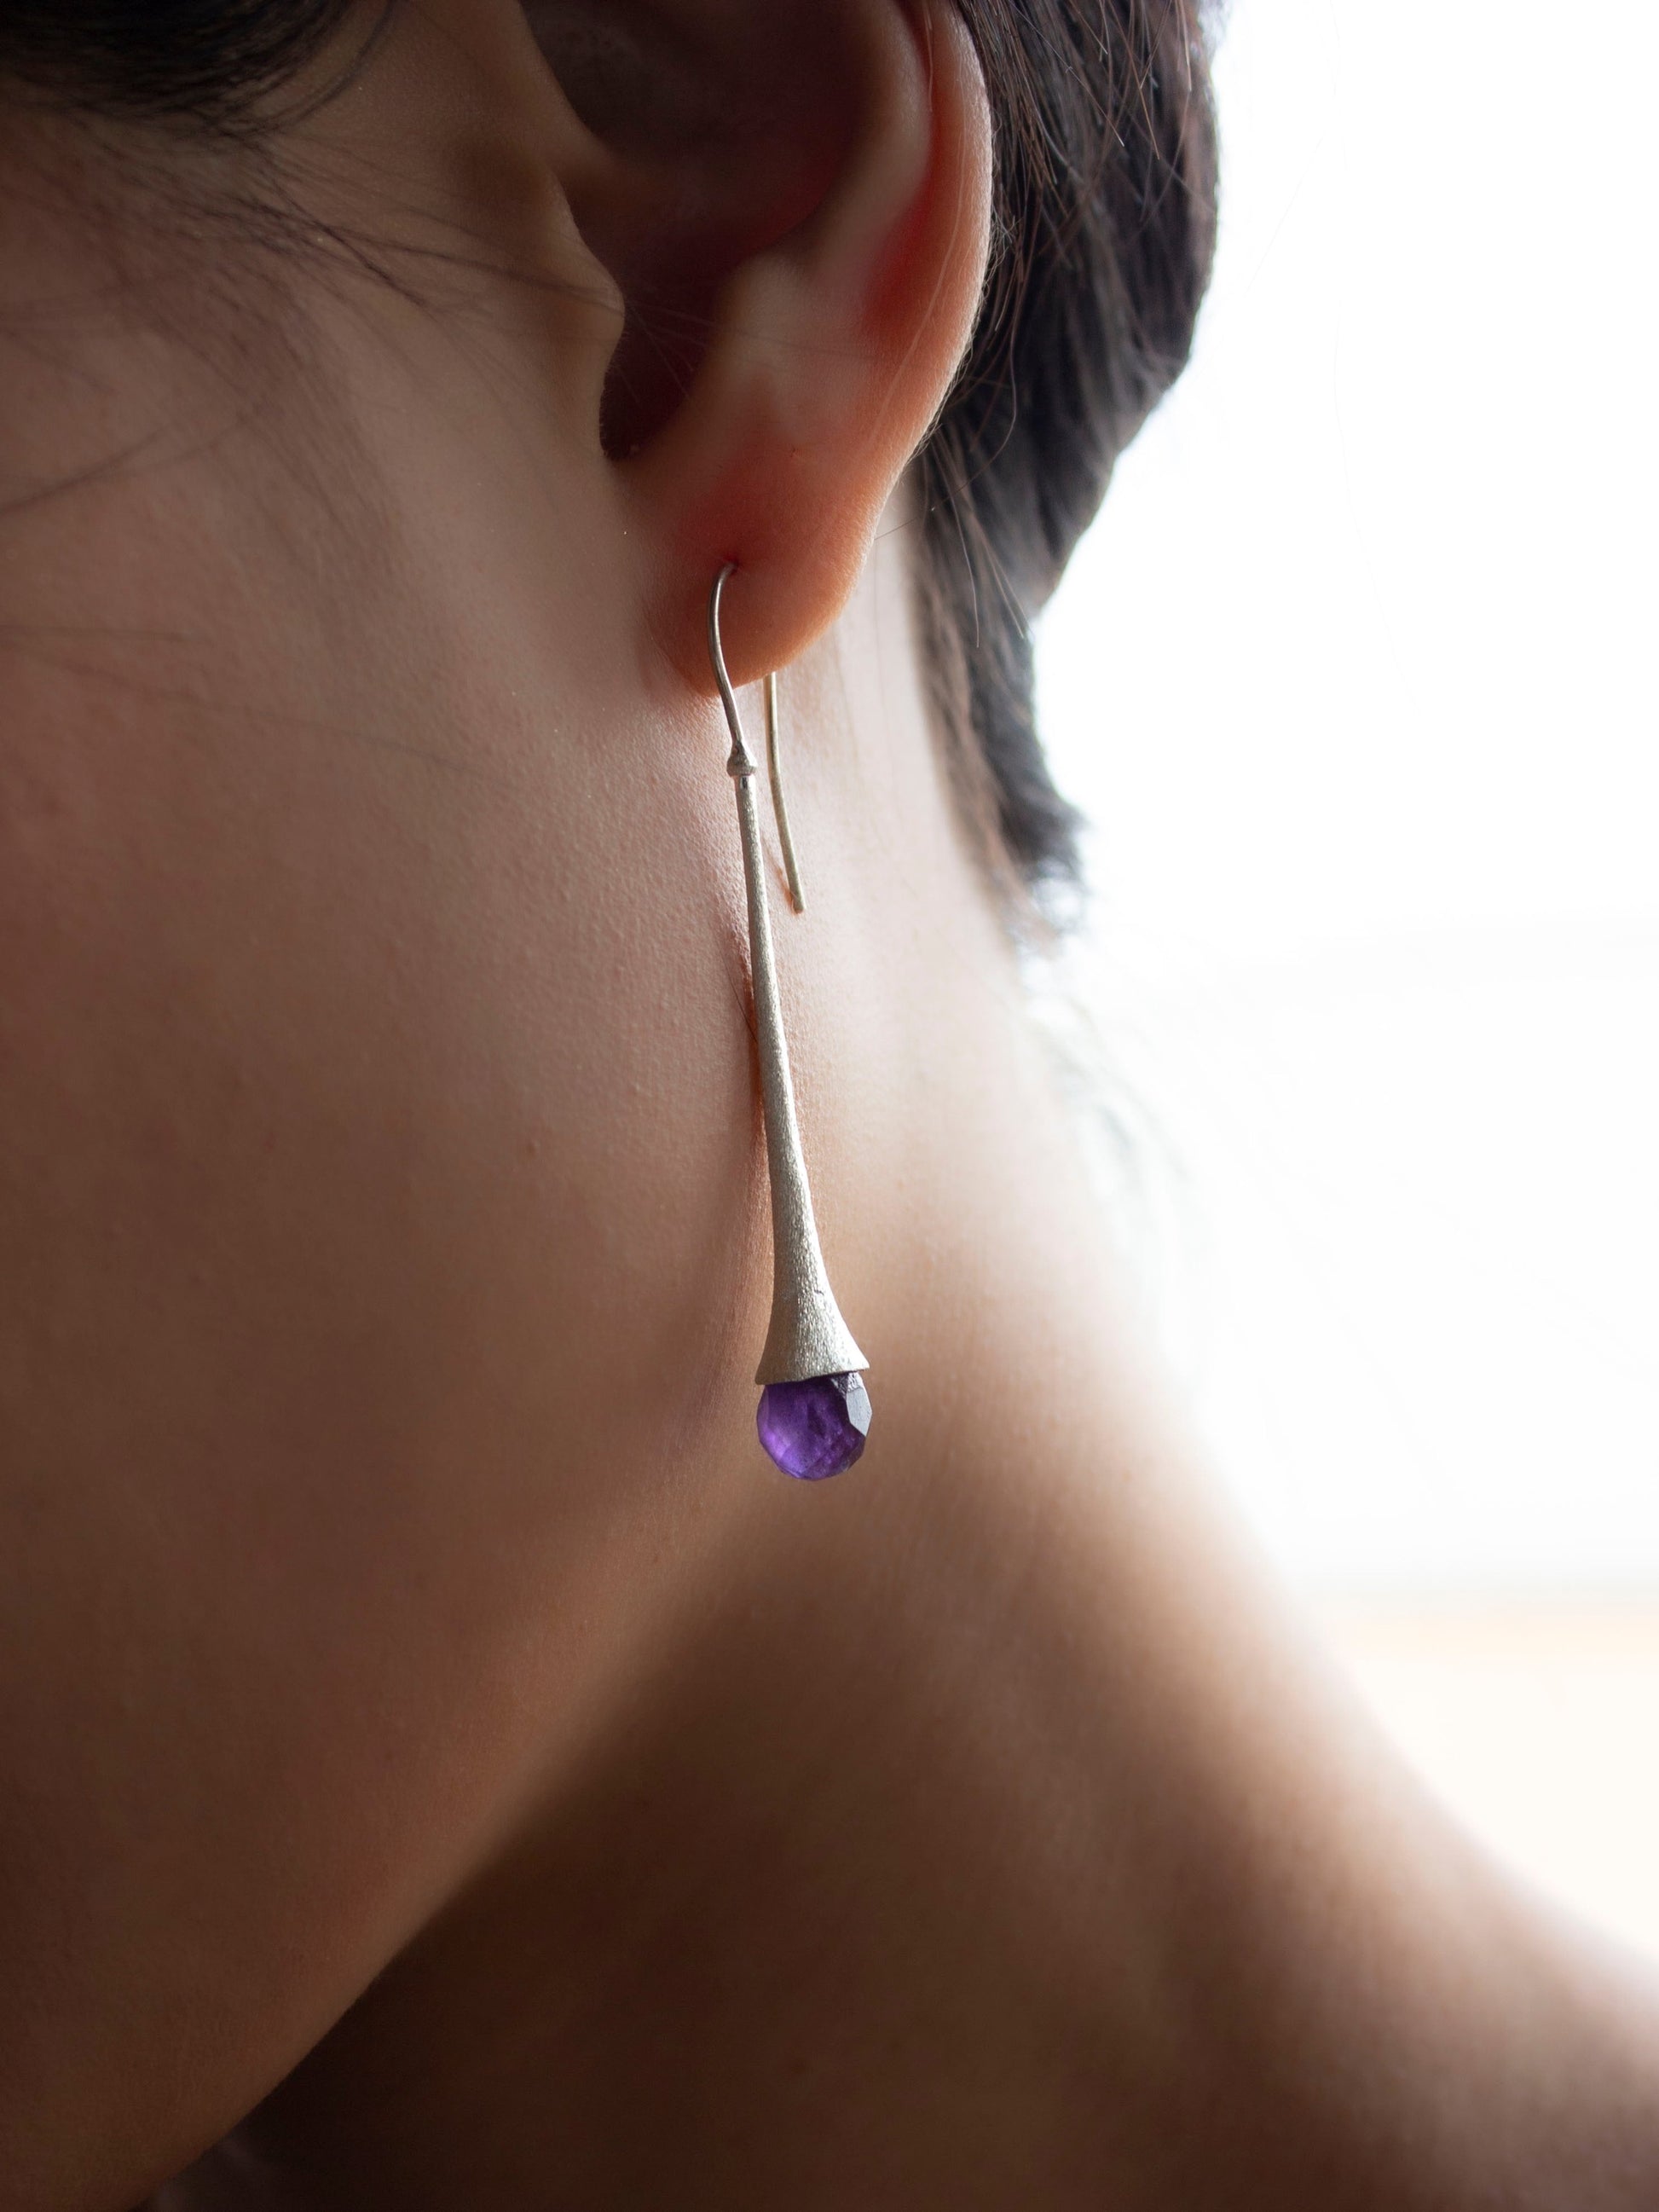 Girl wearing a long and chic silver earring with a briolette cut amethyst gemstone